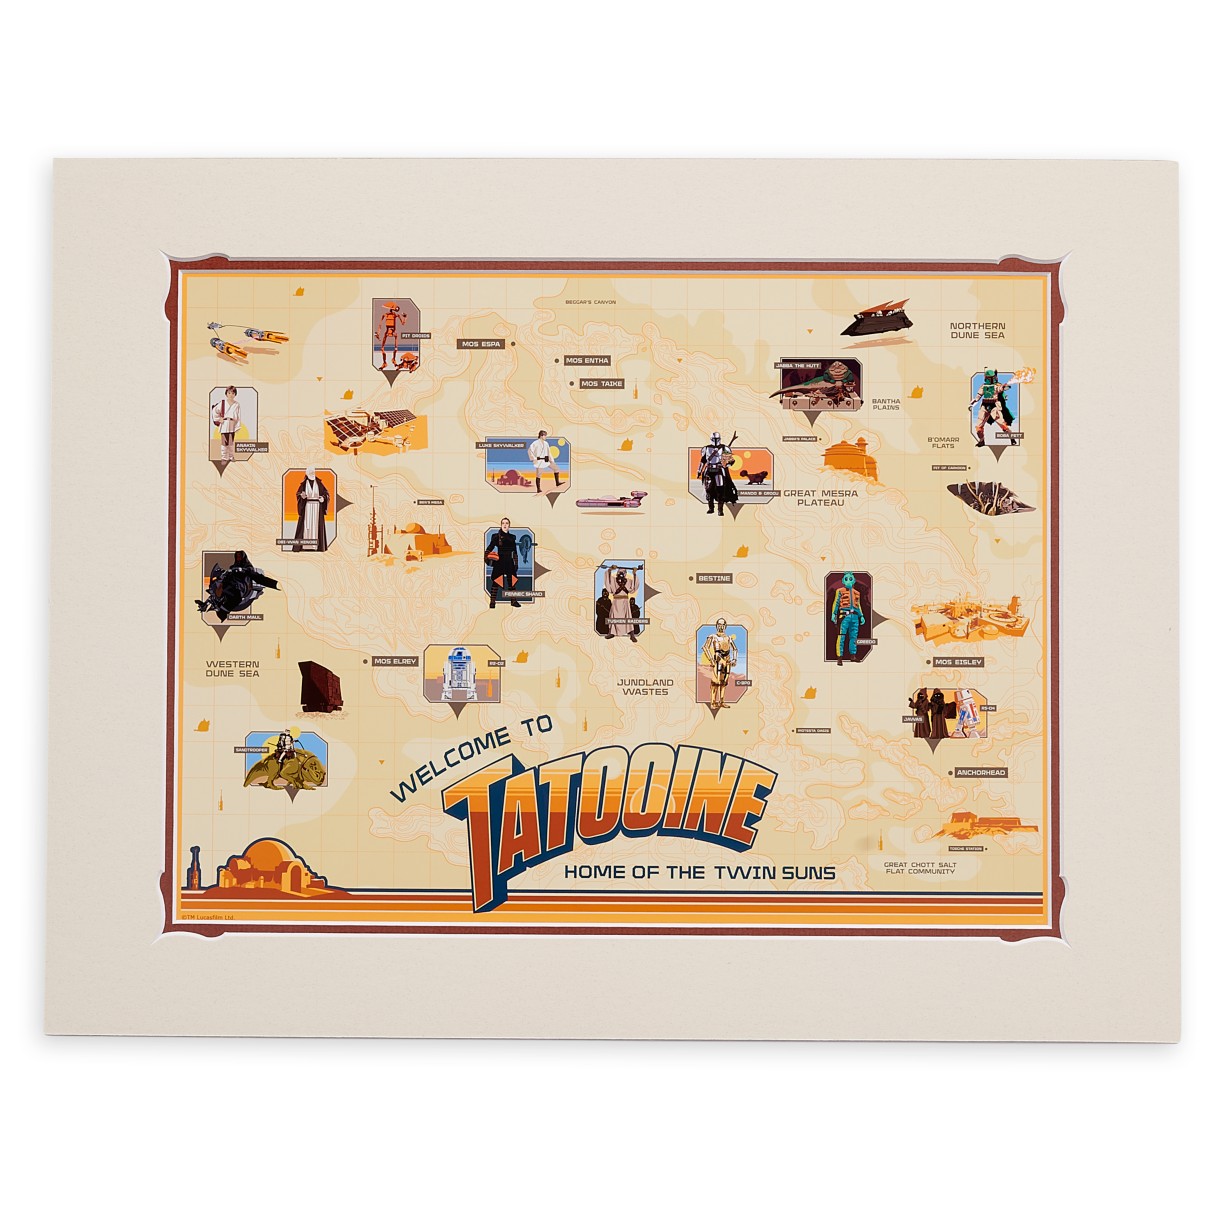 Tatooine Map Deluxe Print – Star Wars: A New Hope